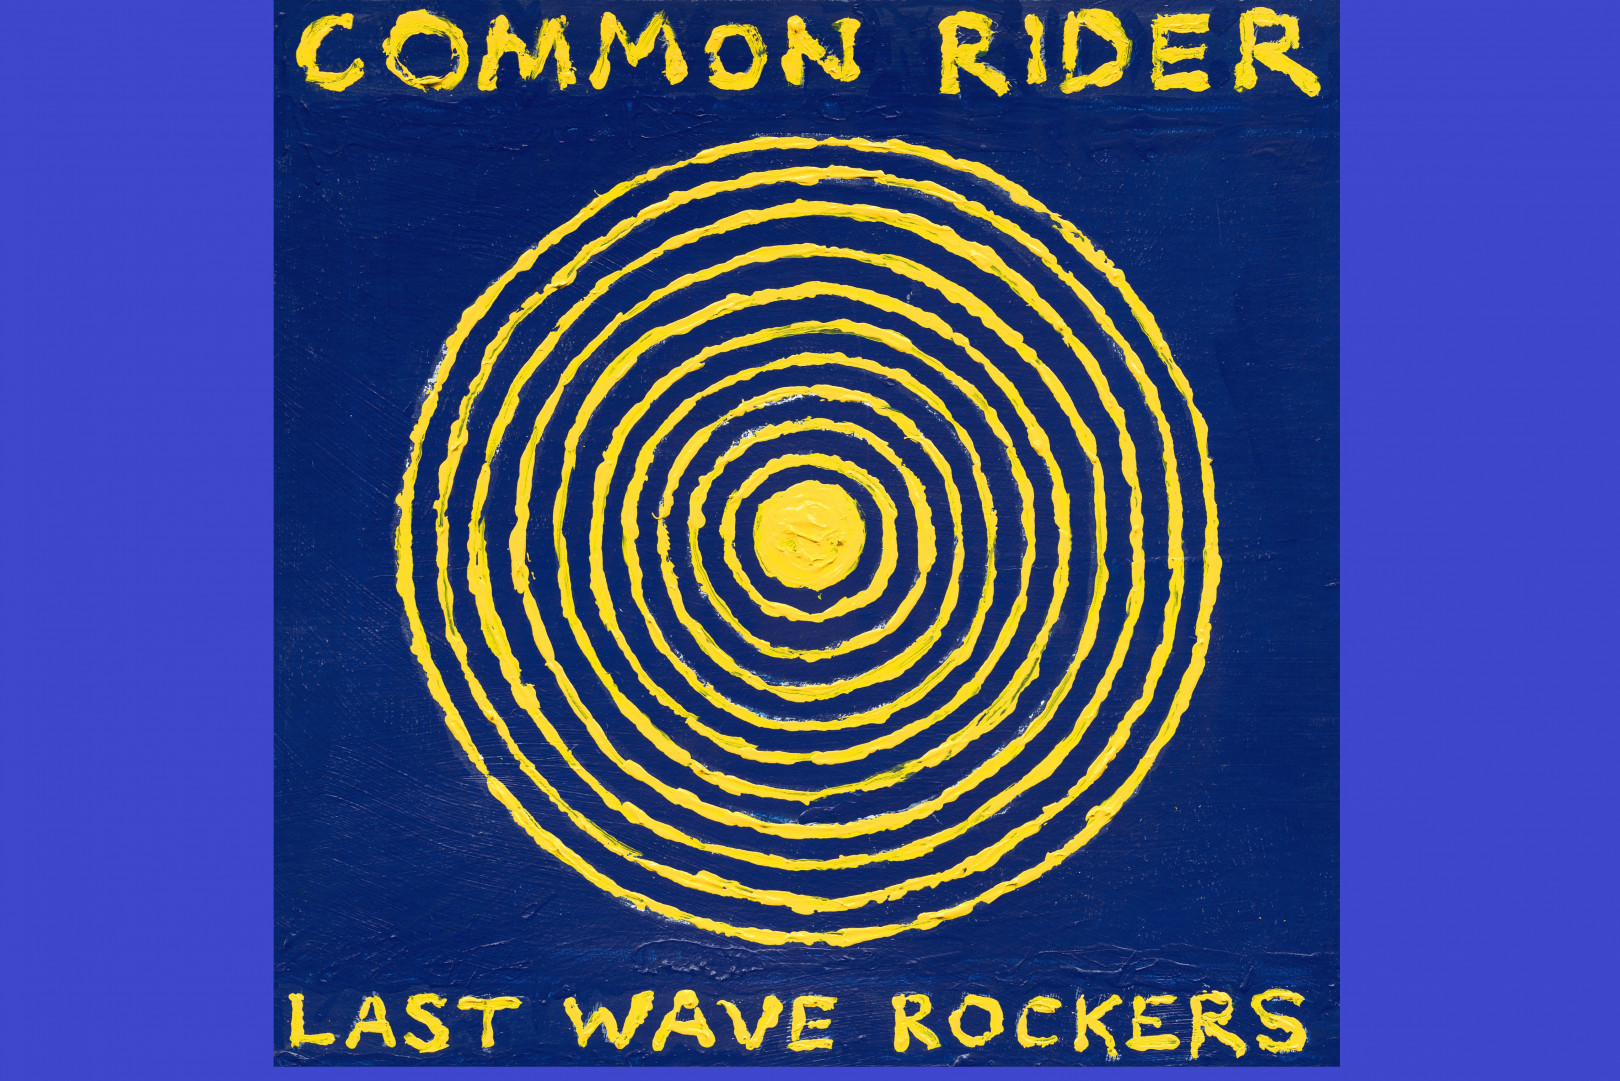 Asian Man Records re-releases first Common Rider album